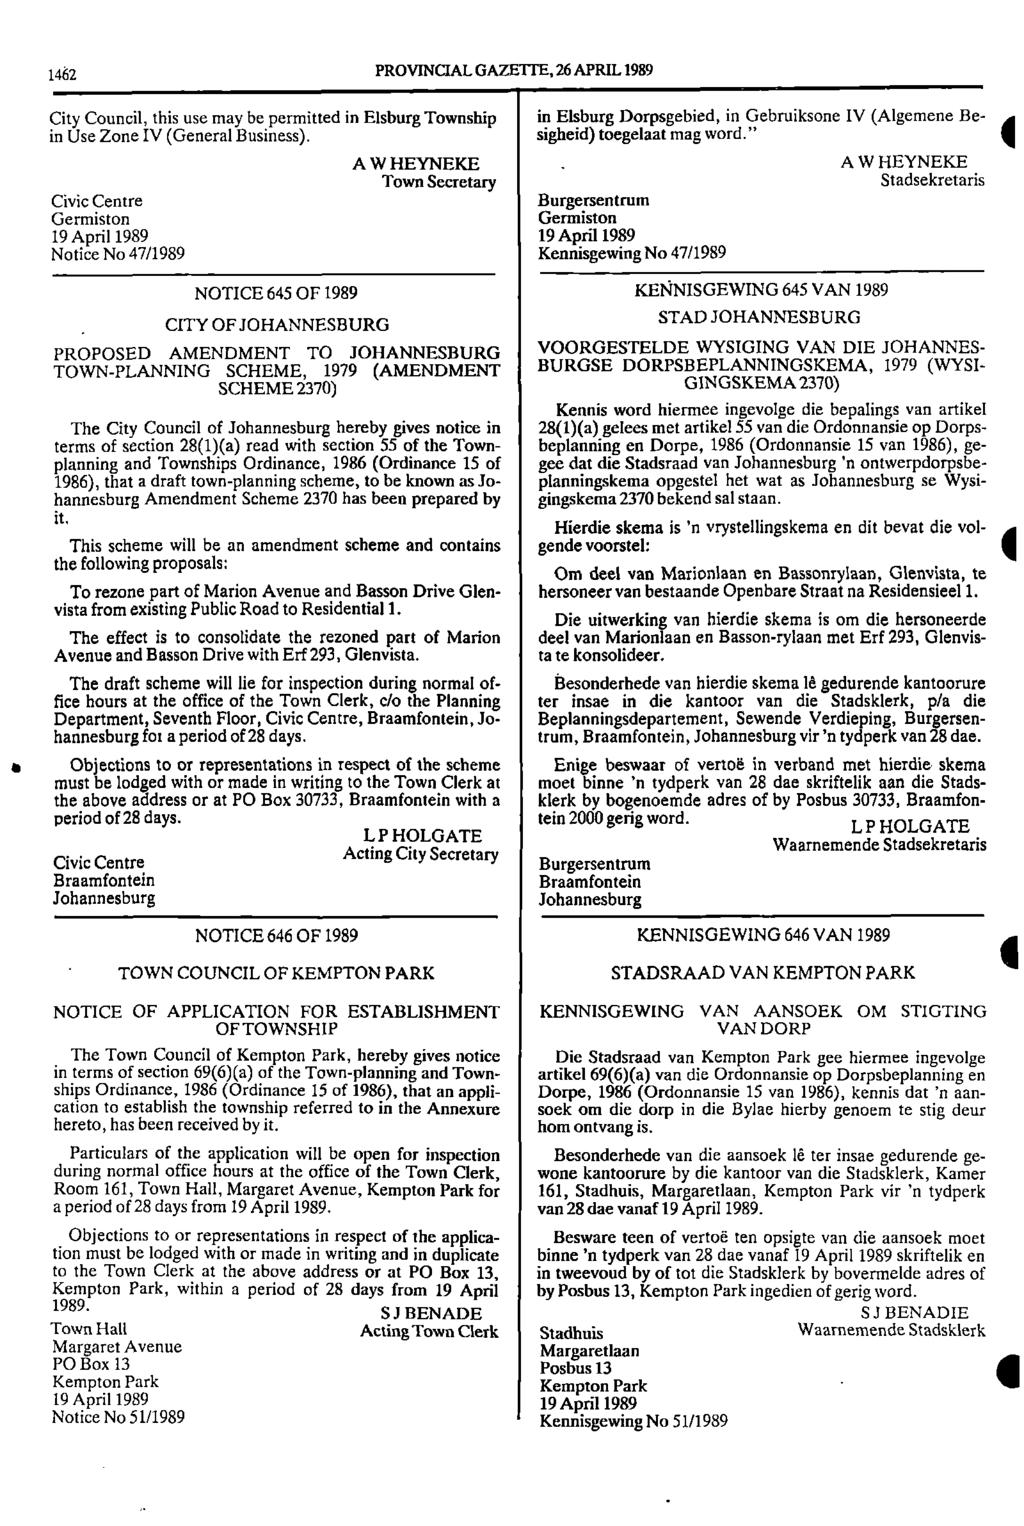 1462 PROVINCIAL GAZETTE, 26 APRIL 1989 City Council, this use may be permitted in Elsburg Township in Elsburg Dorpsgebied, in Gebruiksone IV (Algemene Be in Use Zone IV (General Business) sigheid)